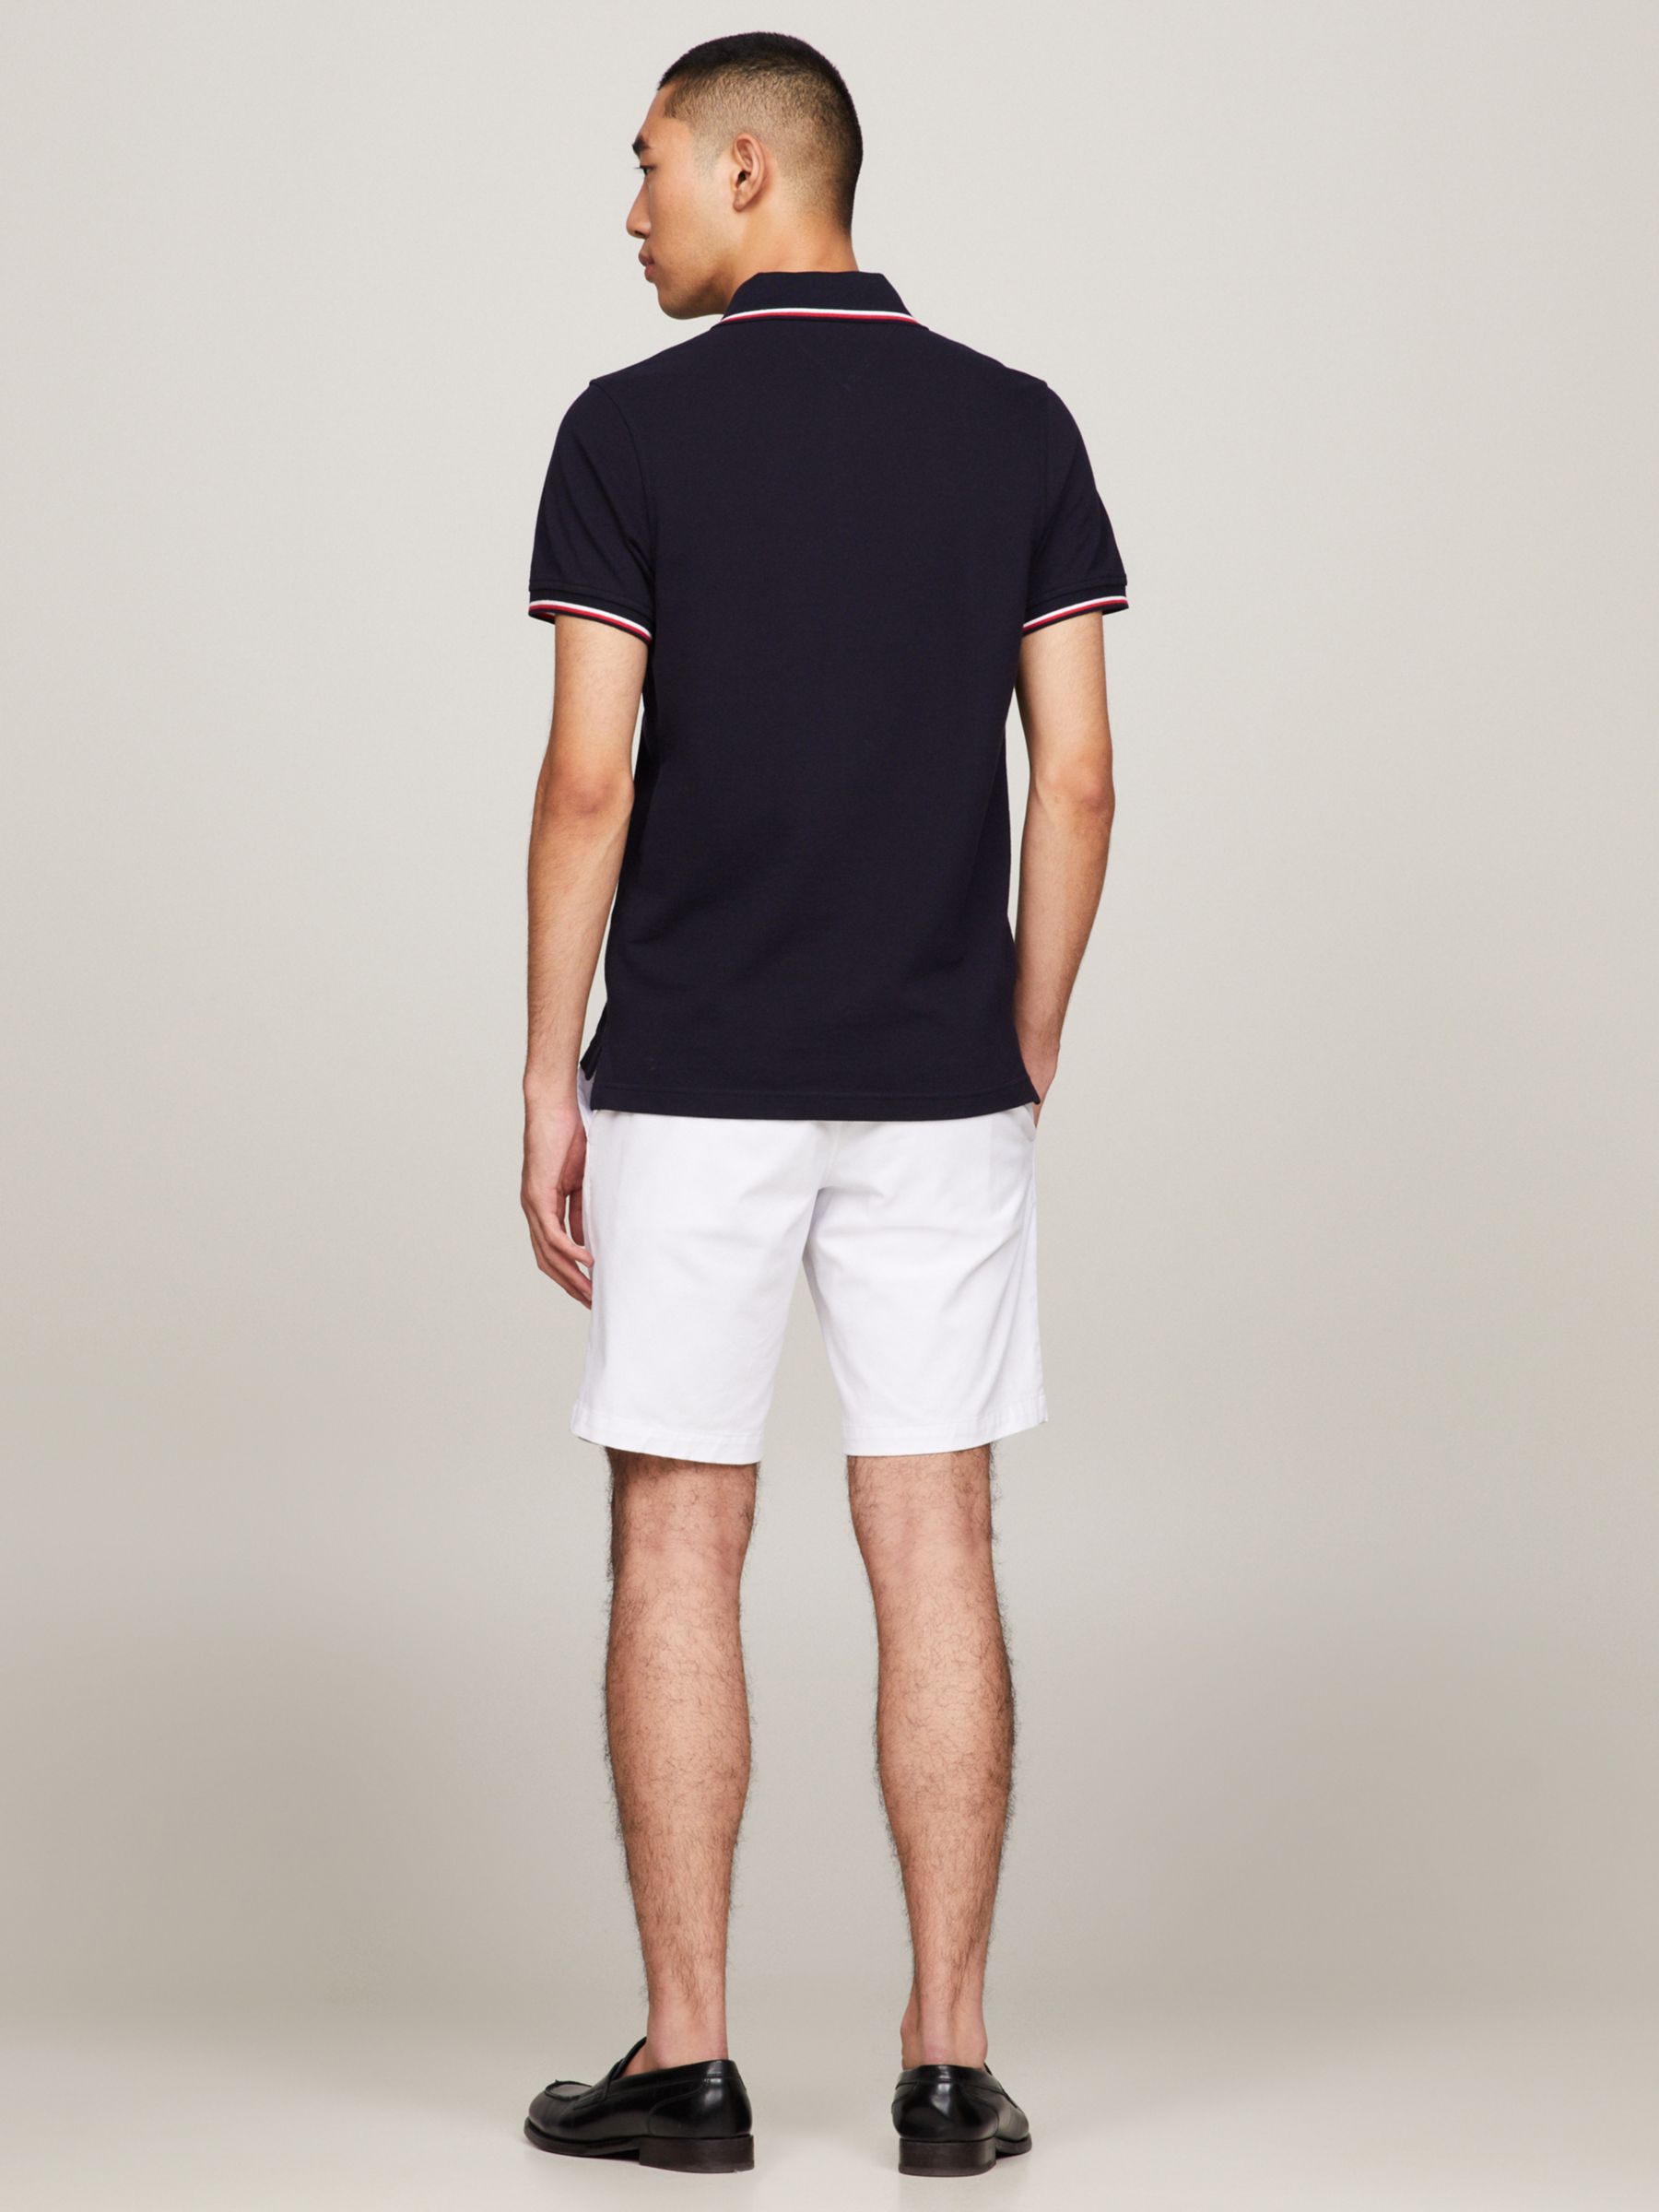 Lewis Organic at Hilfiger Tipped & Tommy John Fit Desert Polo Shirt, Partners Sky Slim Cotton